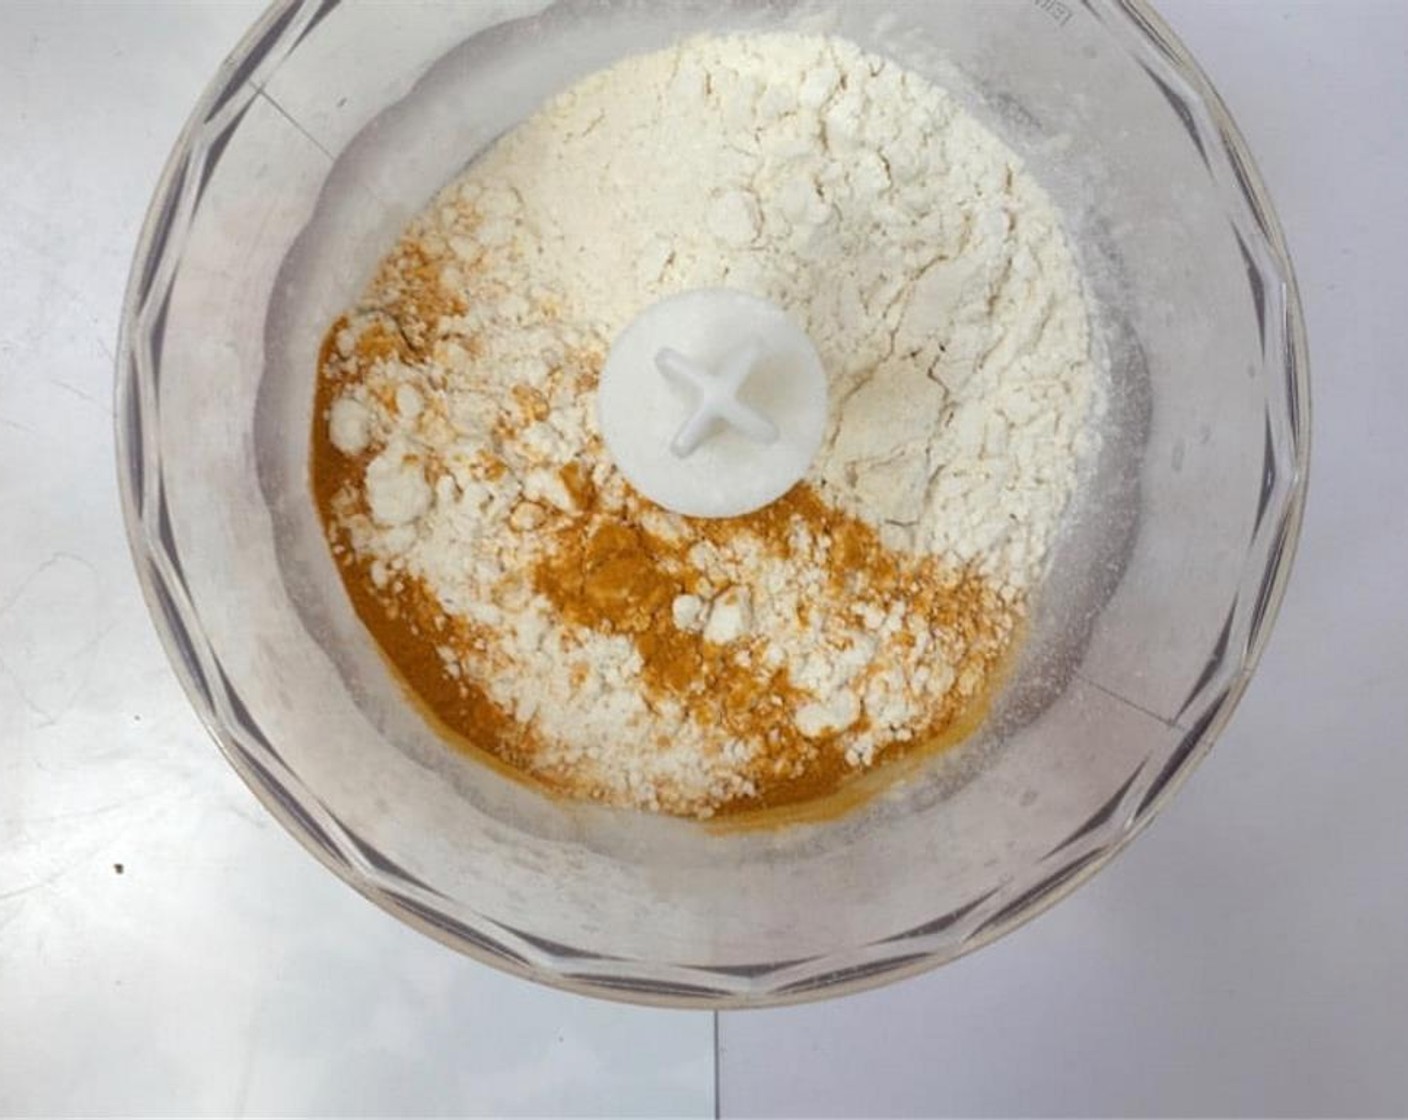 step 1 Add the All-Purpose Flour (1 cup), Caster Sugar (1 tsp), Ground Turmeric (1/4 tsp), and pinch of Salt (to taste) to a large mixing bowl or a blender.